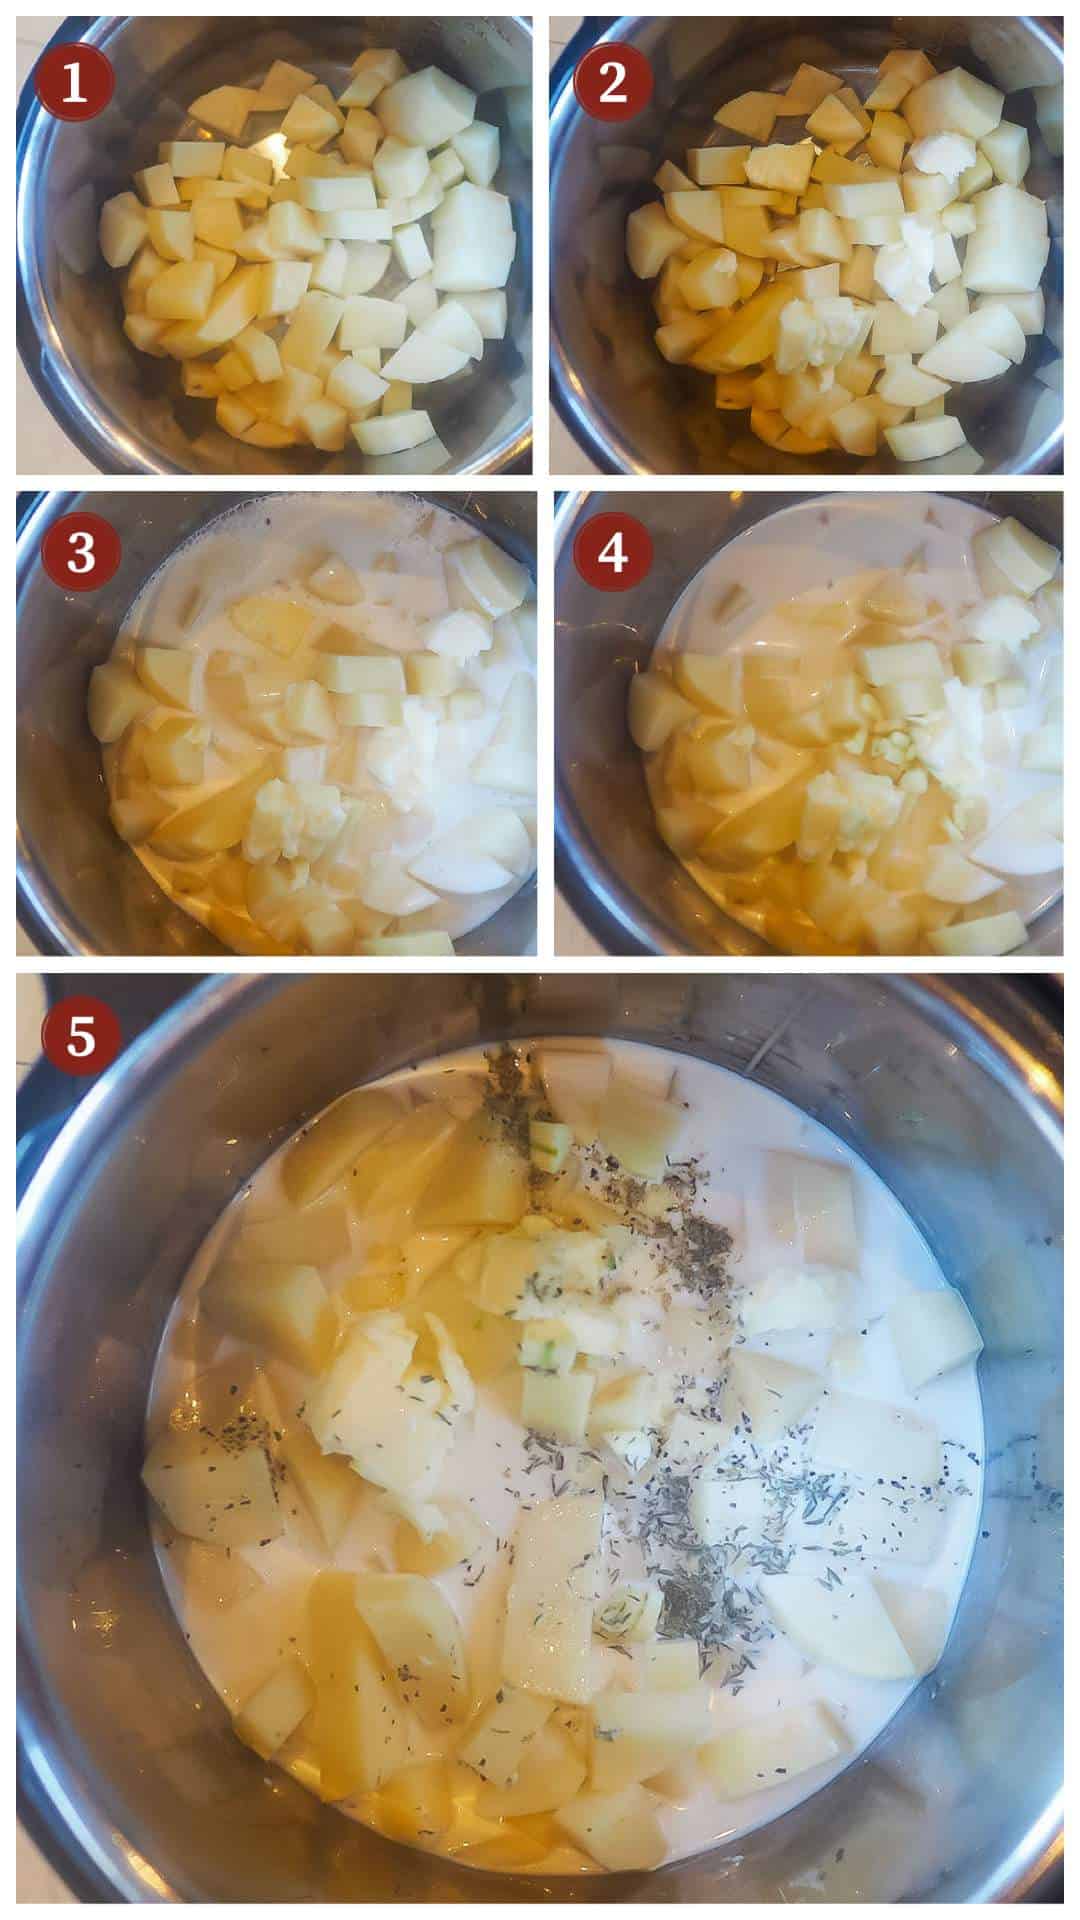 A collage of images showing the process of making mashed potatoes in an instant pot, steps 1 - 5.